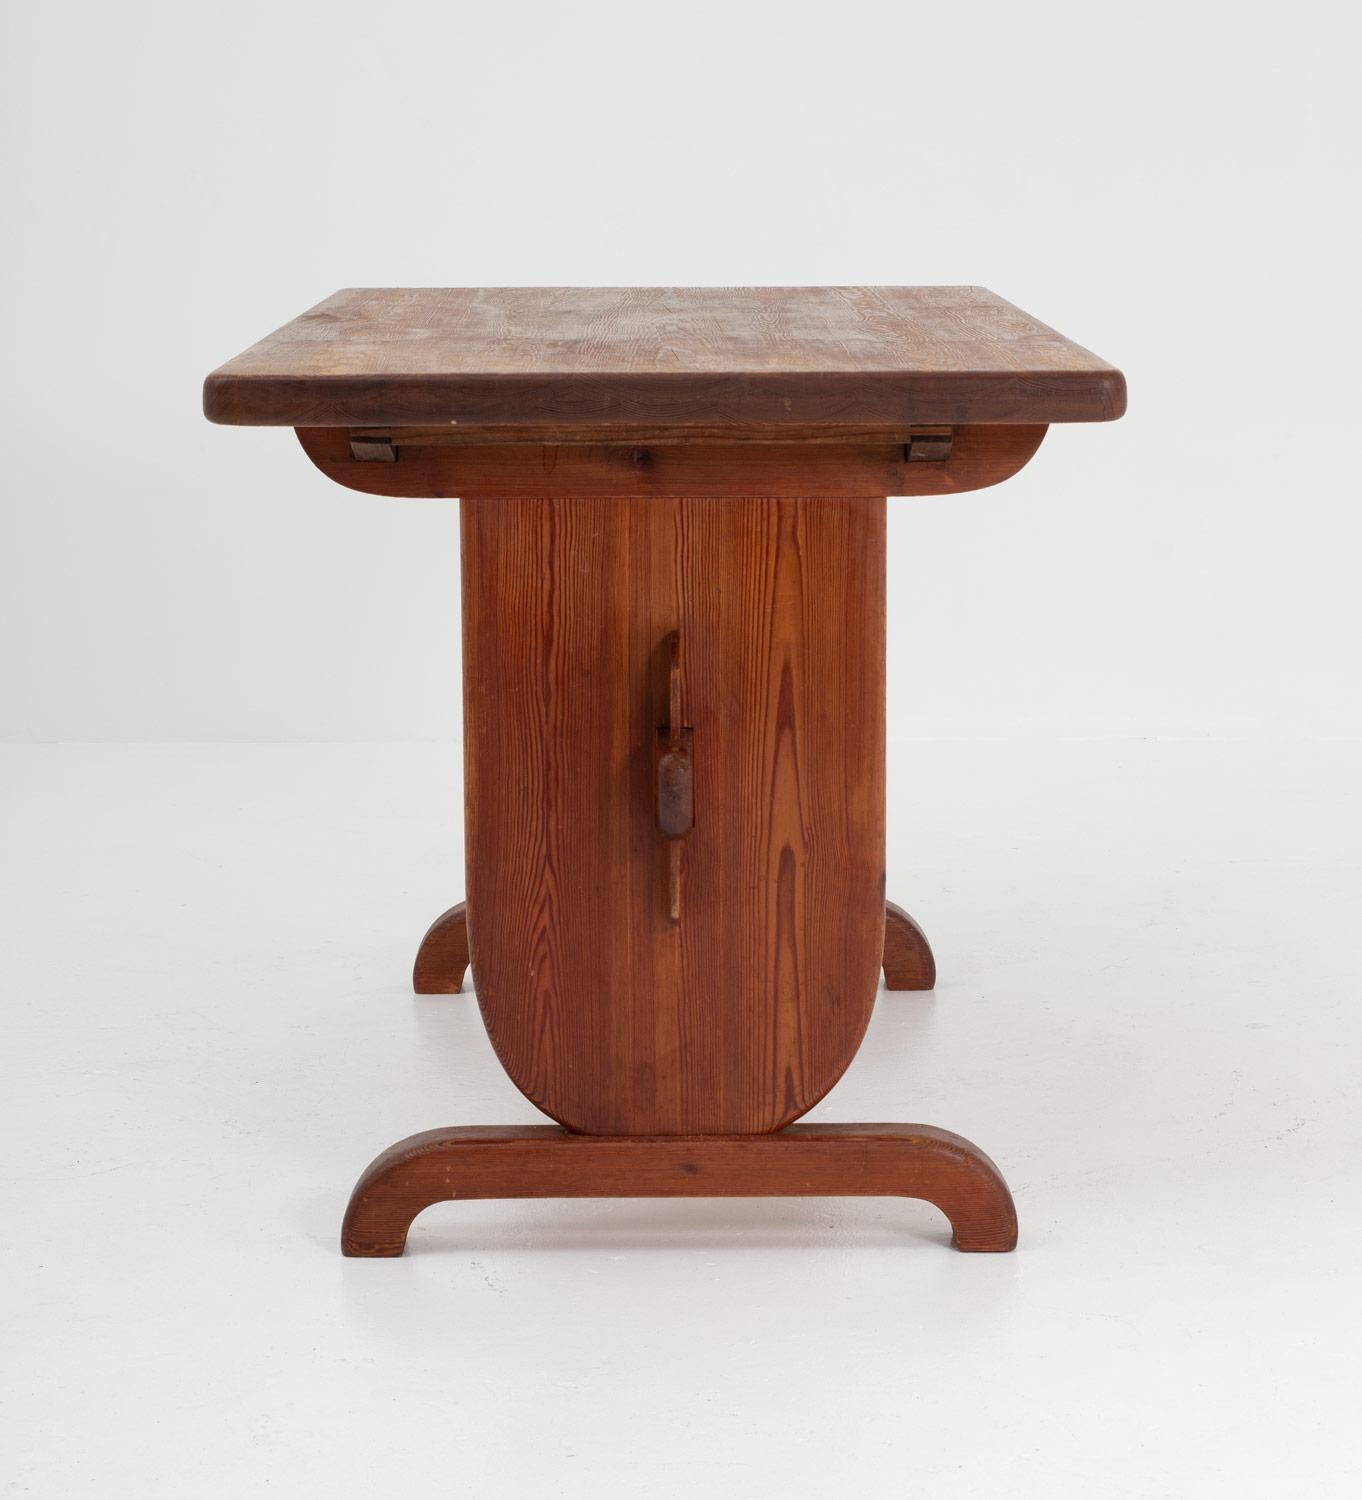 Rare studio craft dining table by Bo Fjaestad, Sweden.
Bo Fjaestad made a series of 